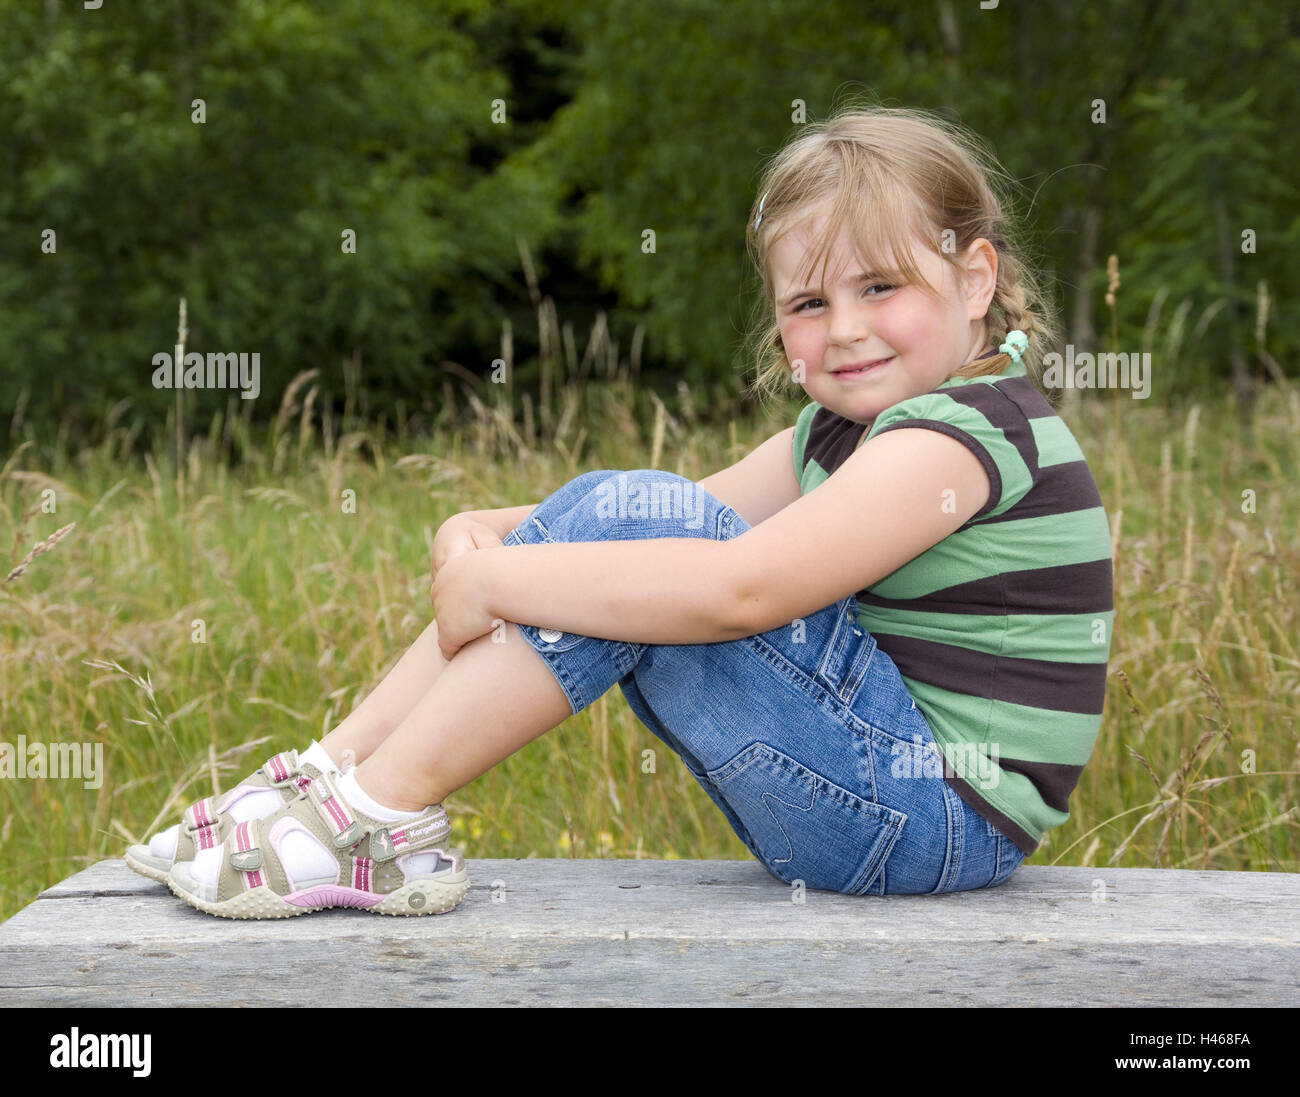 Girls, wooden bank, sit, smile side view, model released, people, child, blond, edge the forest, outside, nature, wood, grass, whole bodies, leisure time, summer, childhood, Stock Photo